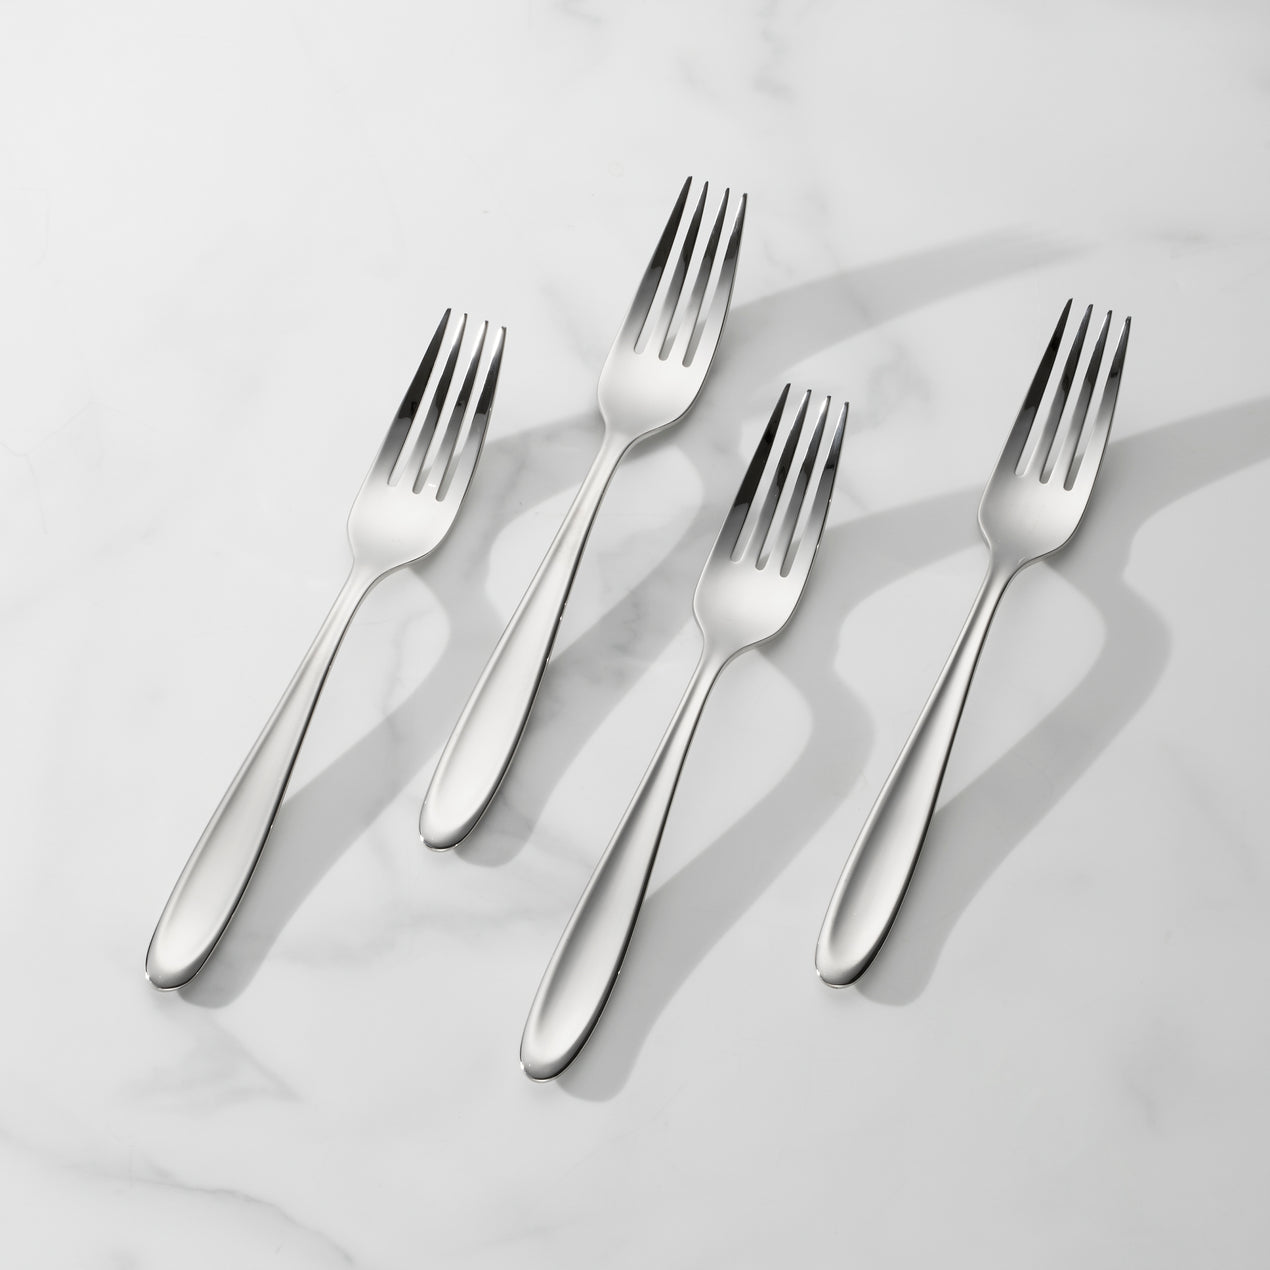 eating with back of fork｜TikTok Search